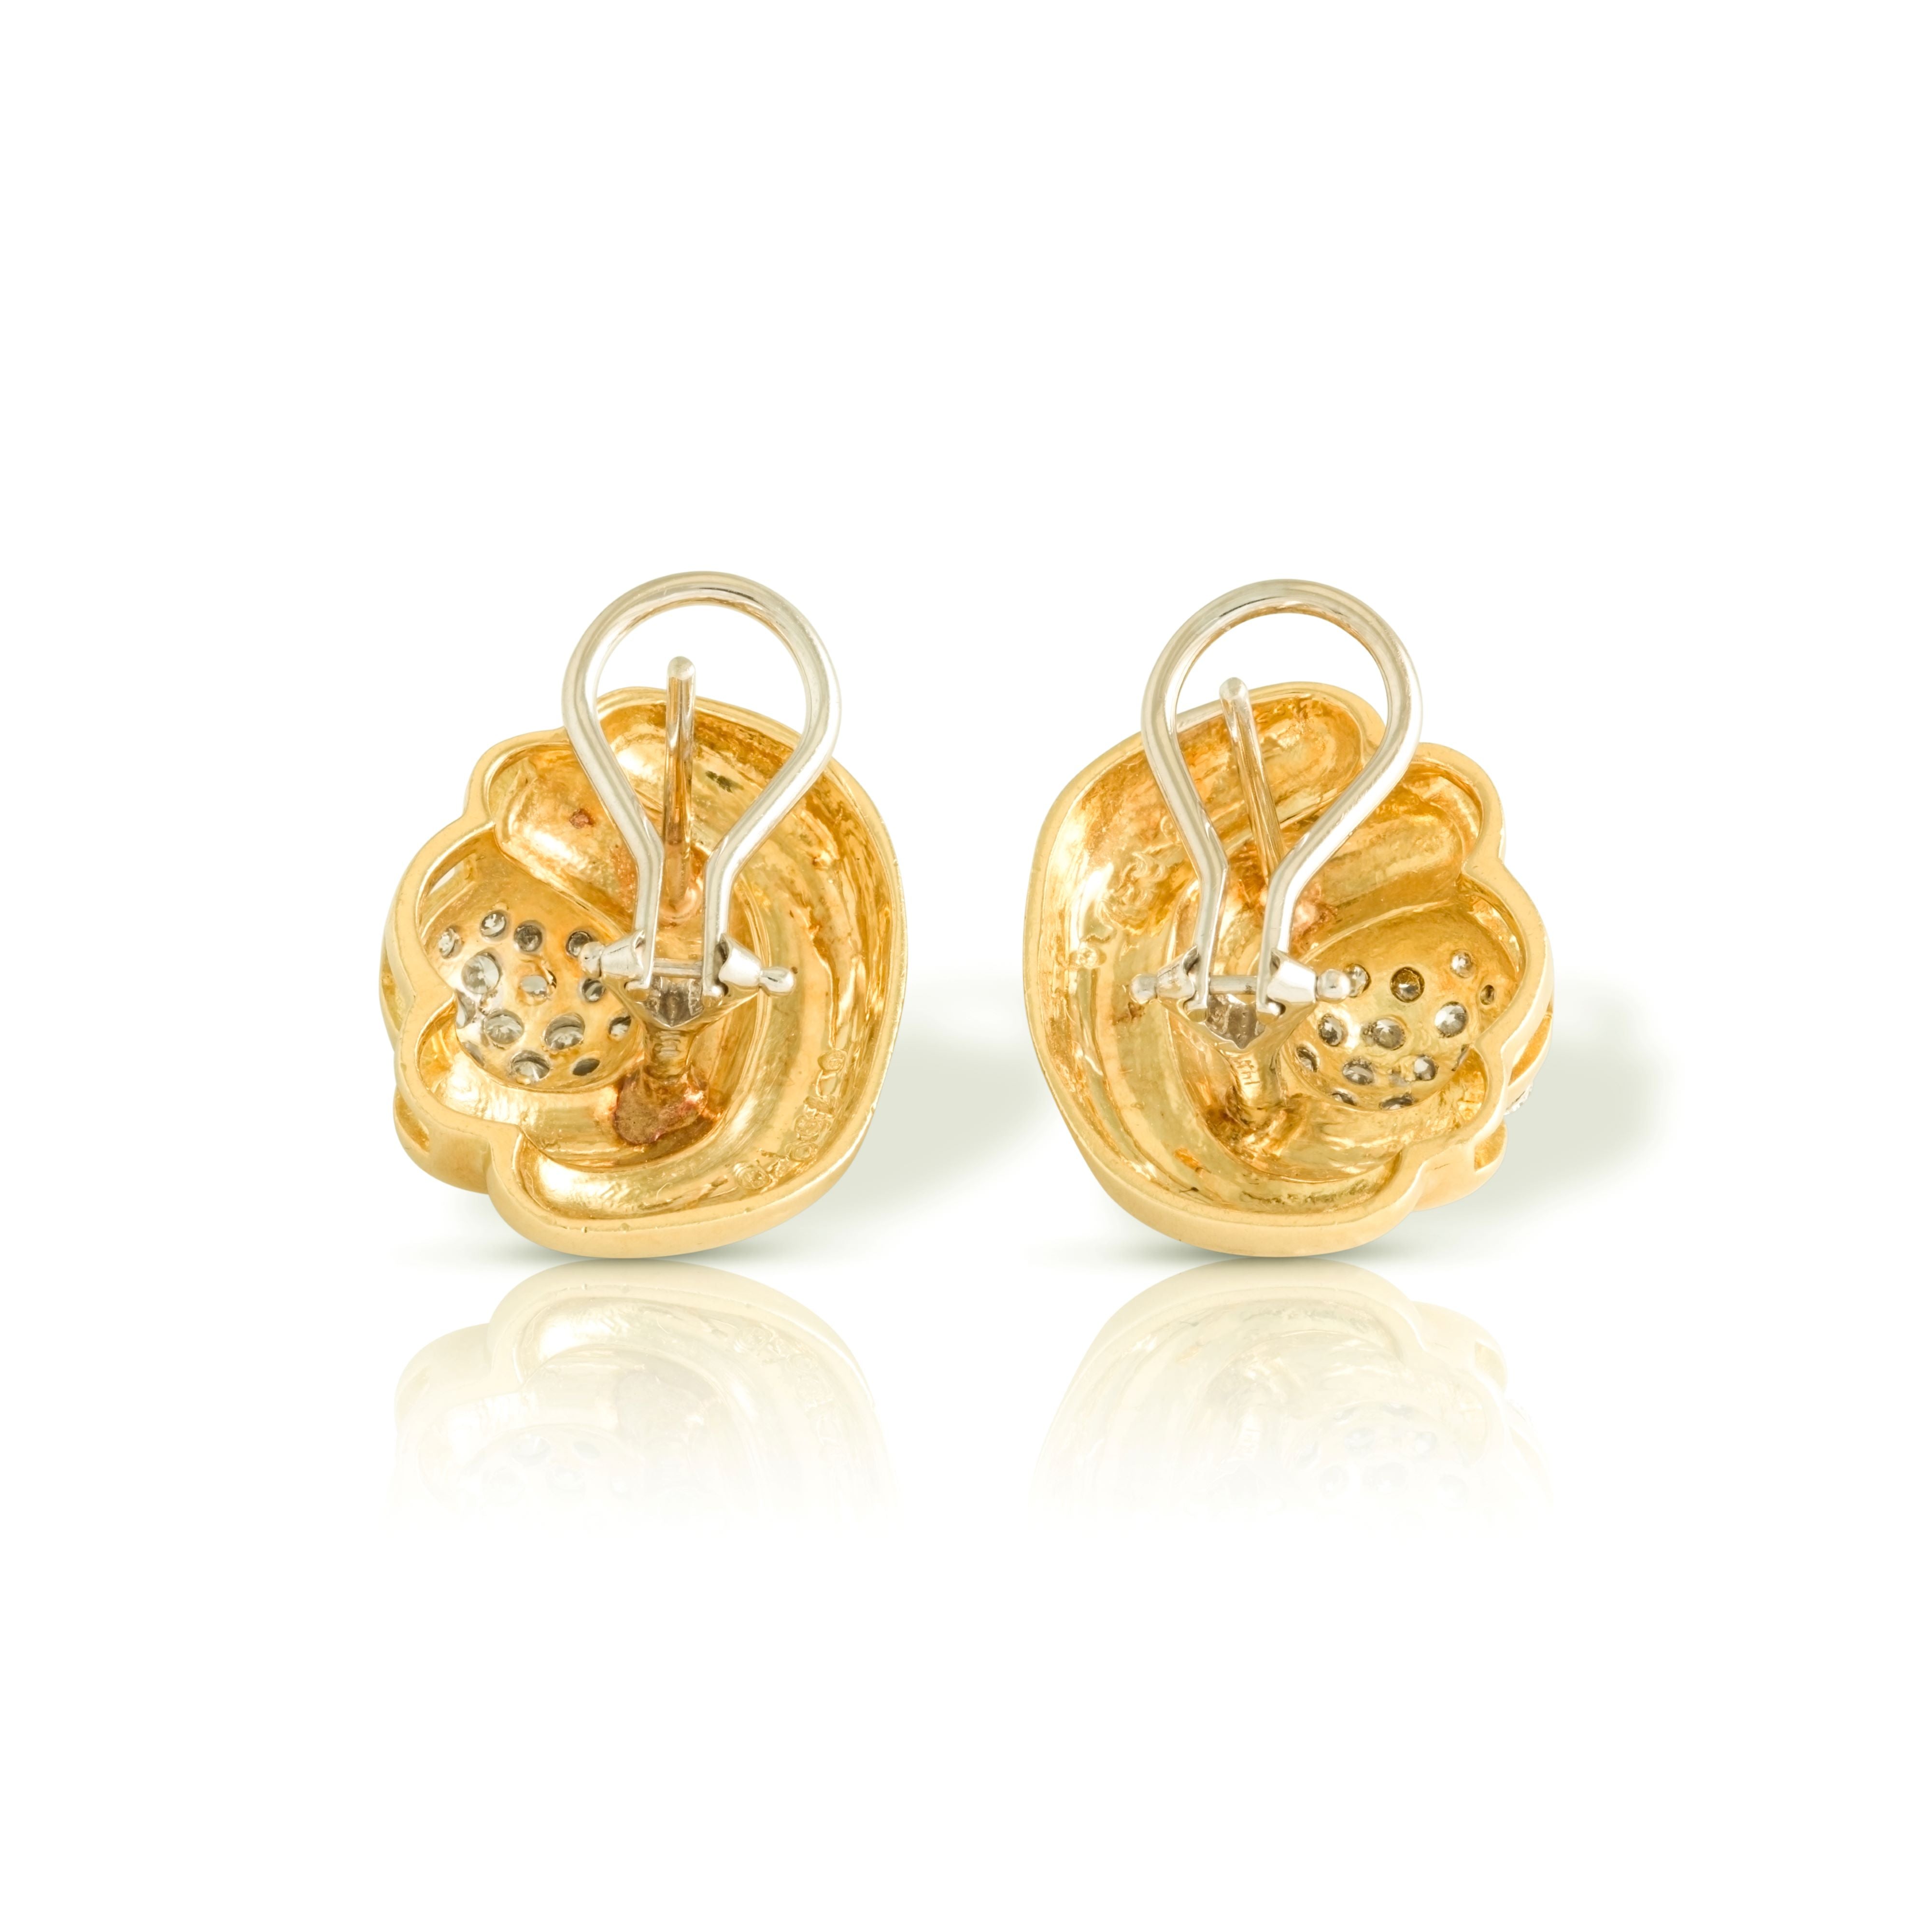 Omega closures on vintage gold earrings. 